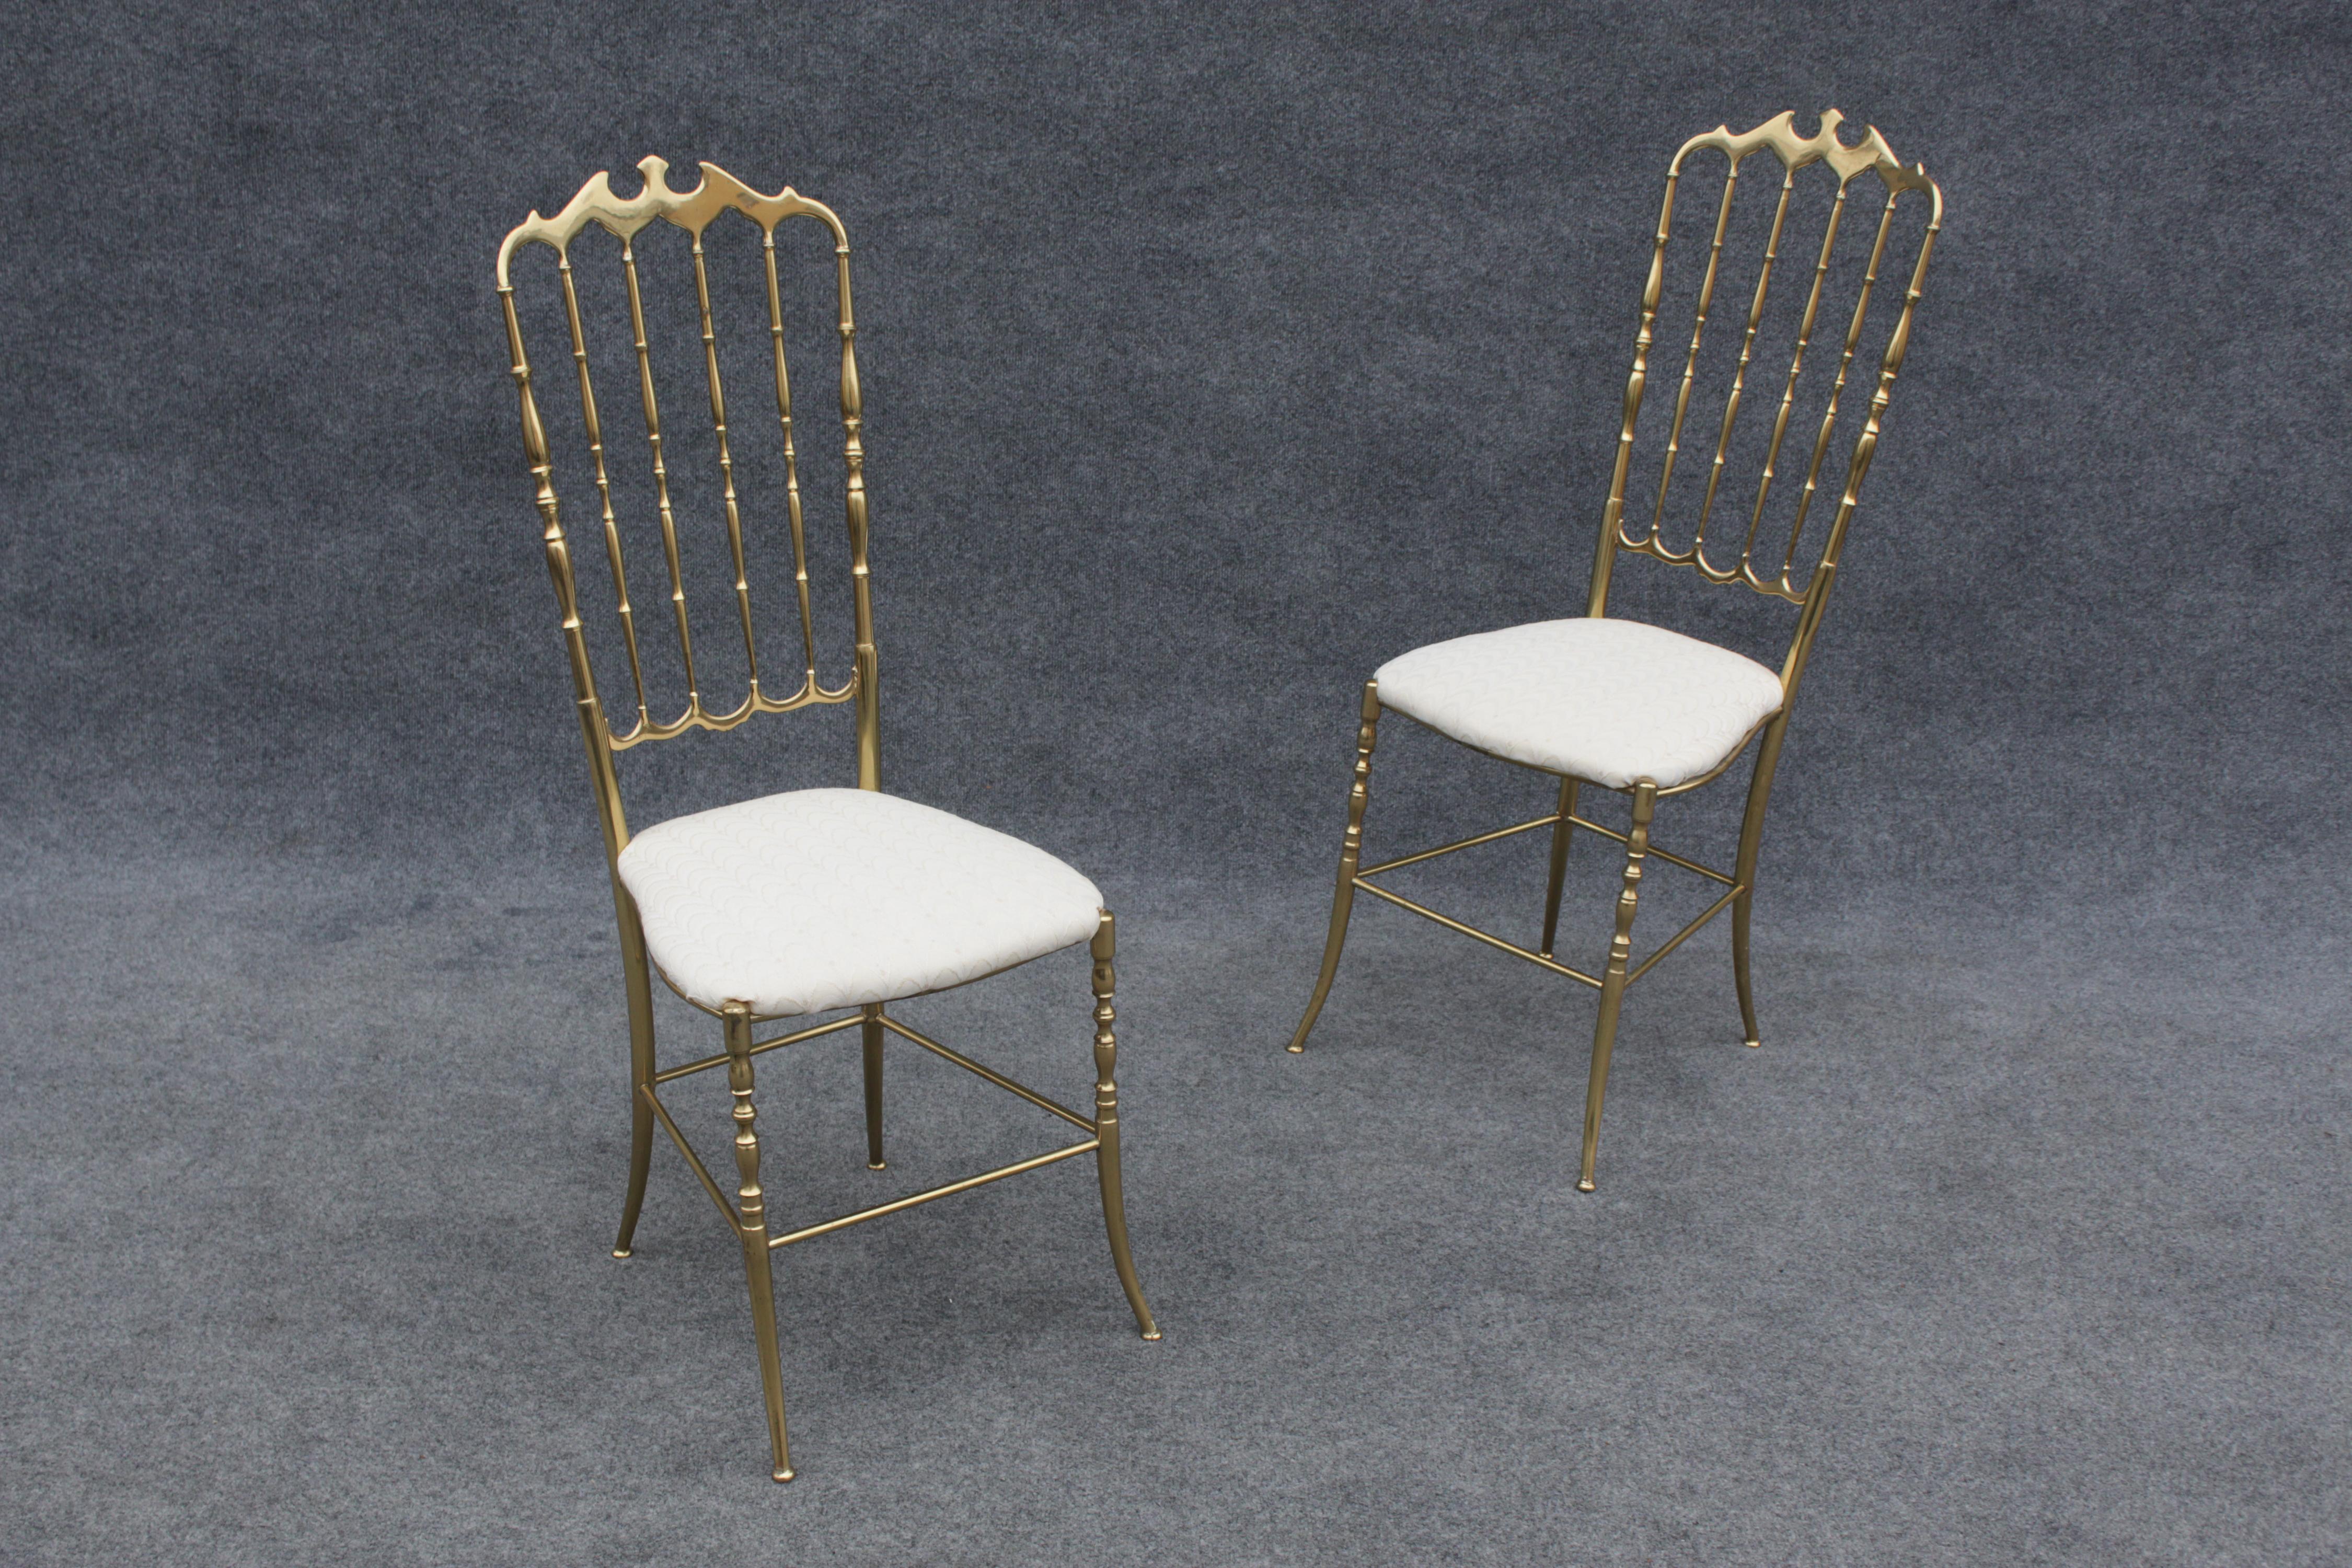 Pair of Solid Brass & White Upholstered Dining or Side Chairs by Chiavari Italy For Sale 6